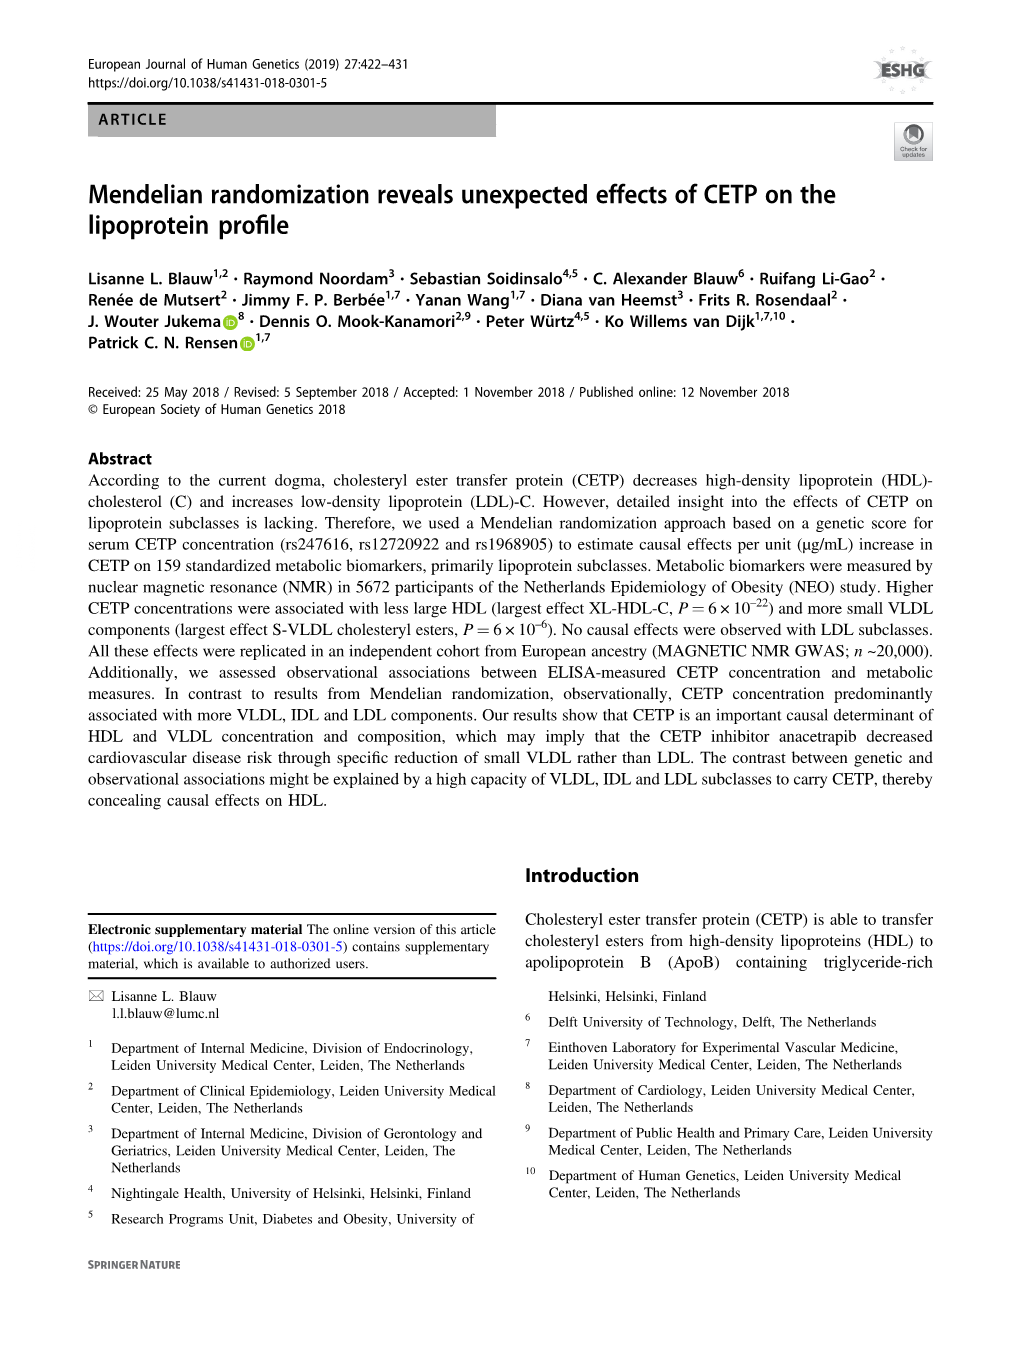 Mendelian Randomization Reveals Unexpected Effects of CETP on the Lipoprotein Proﬁle